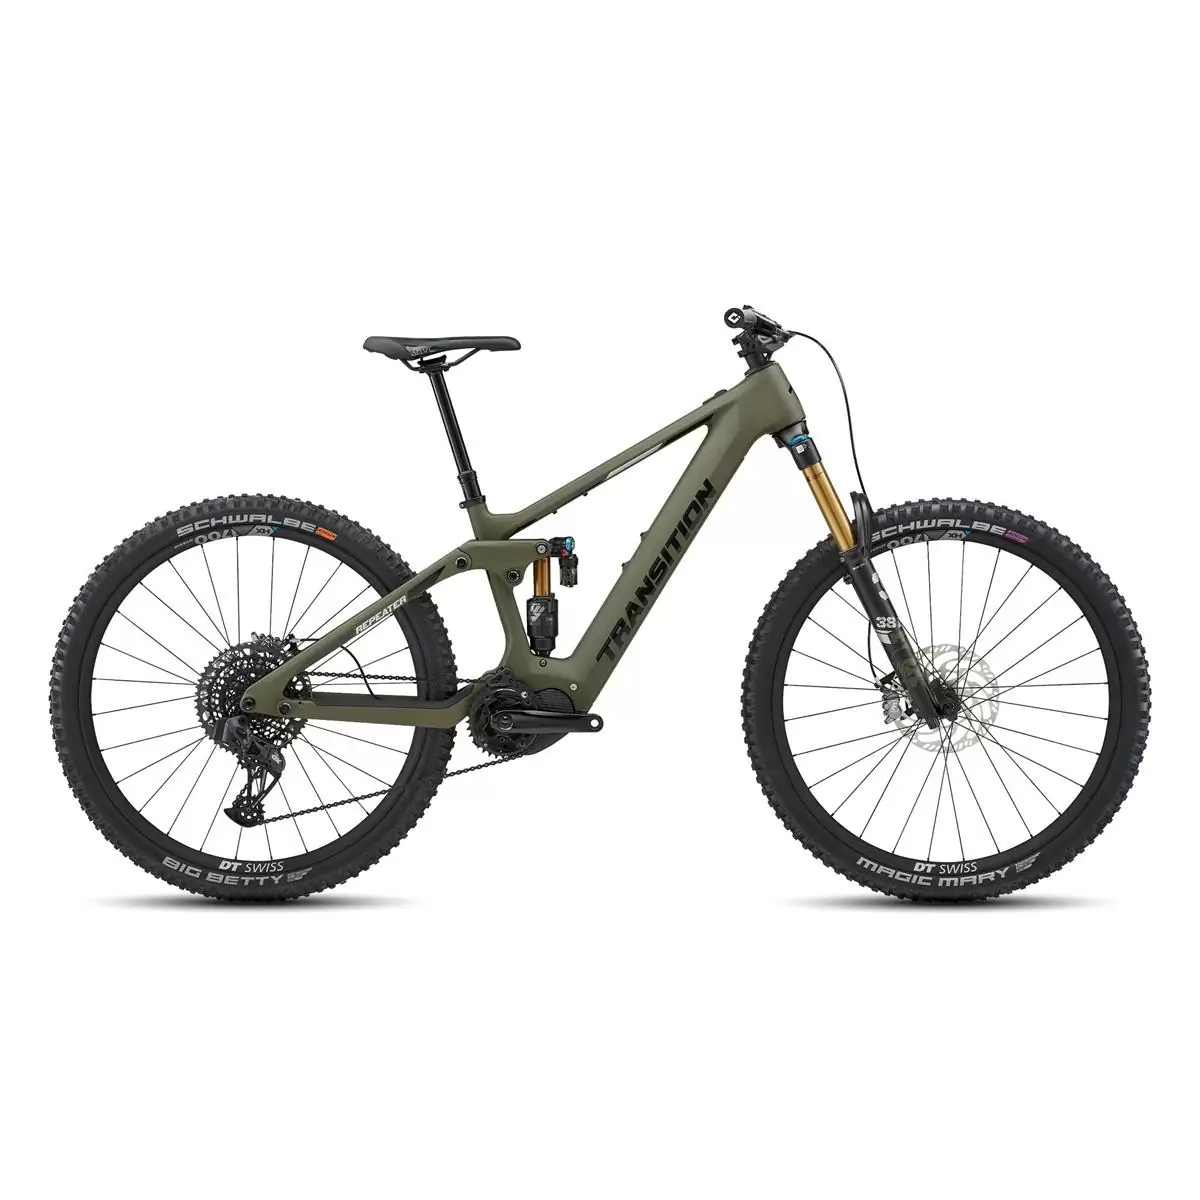 Repeater Carbon AXS 29'' 160mm 12s 630Wh Shimano EP8 Mossy Green Größe M - image